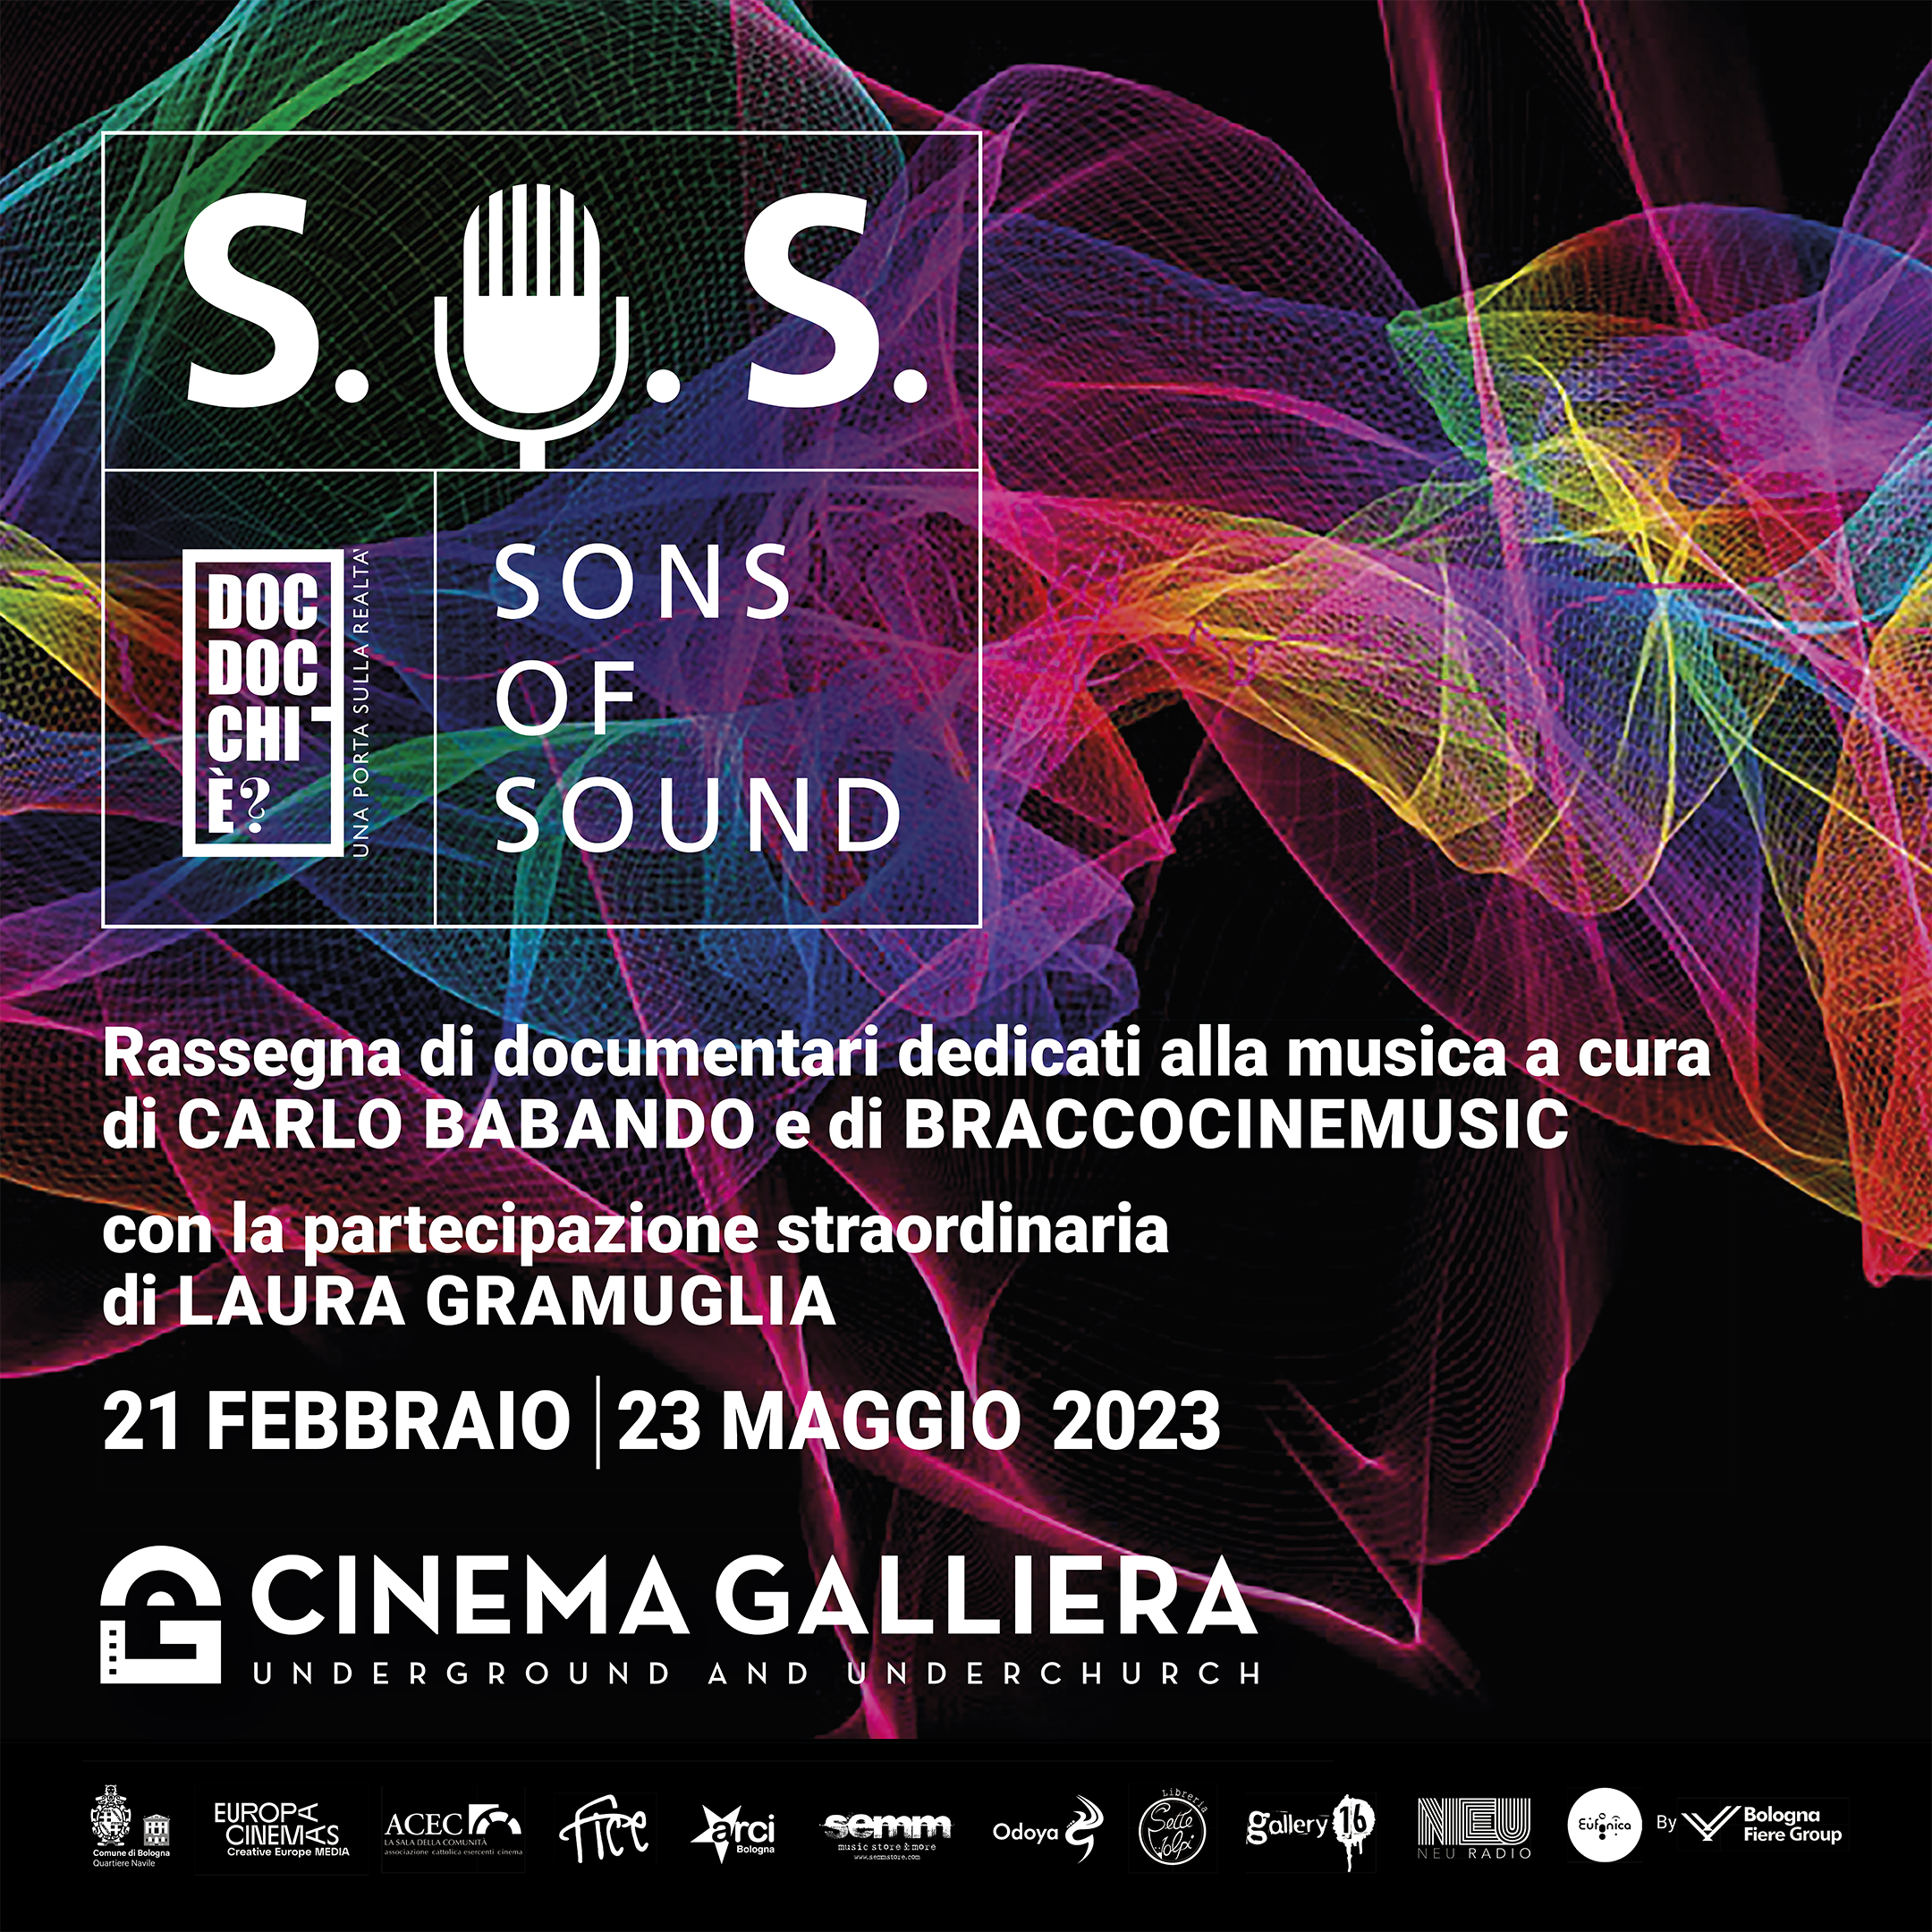 SOS SONS OF SOUND 2023